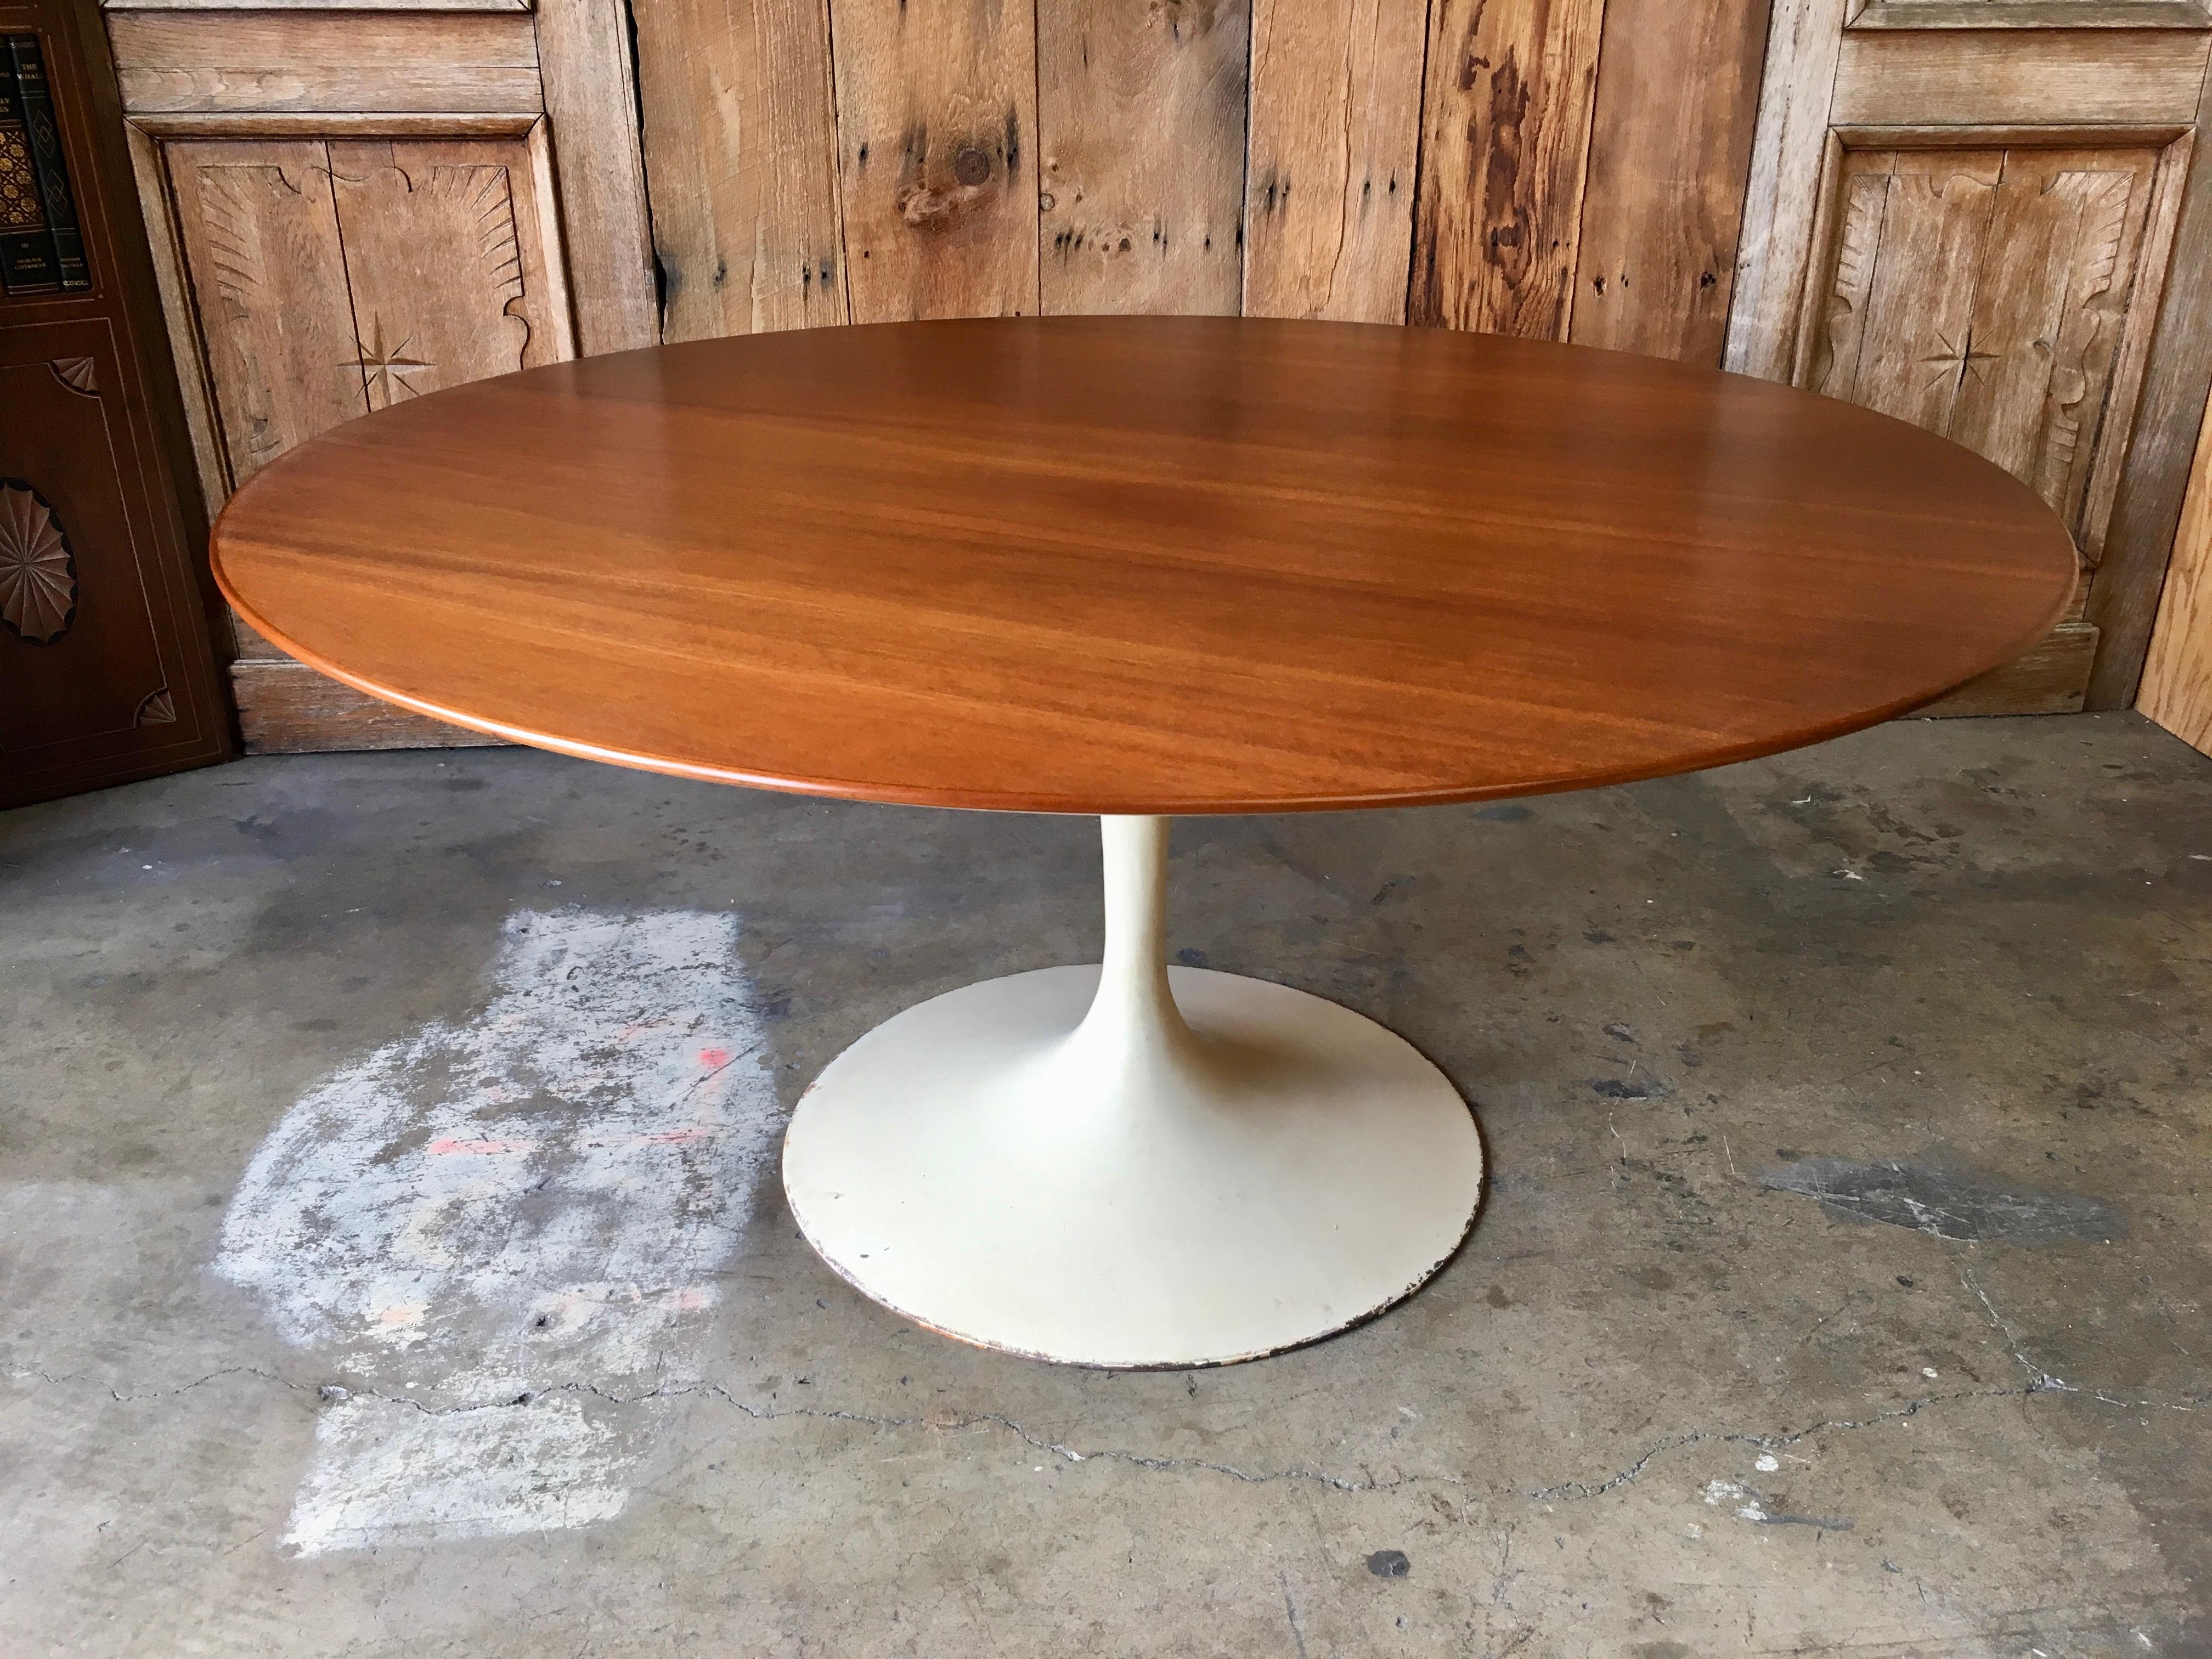 Walnut topped dining table with beveled edge and off white metal base.